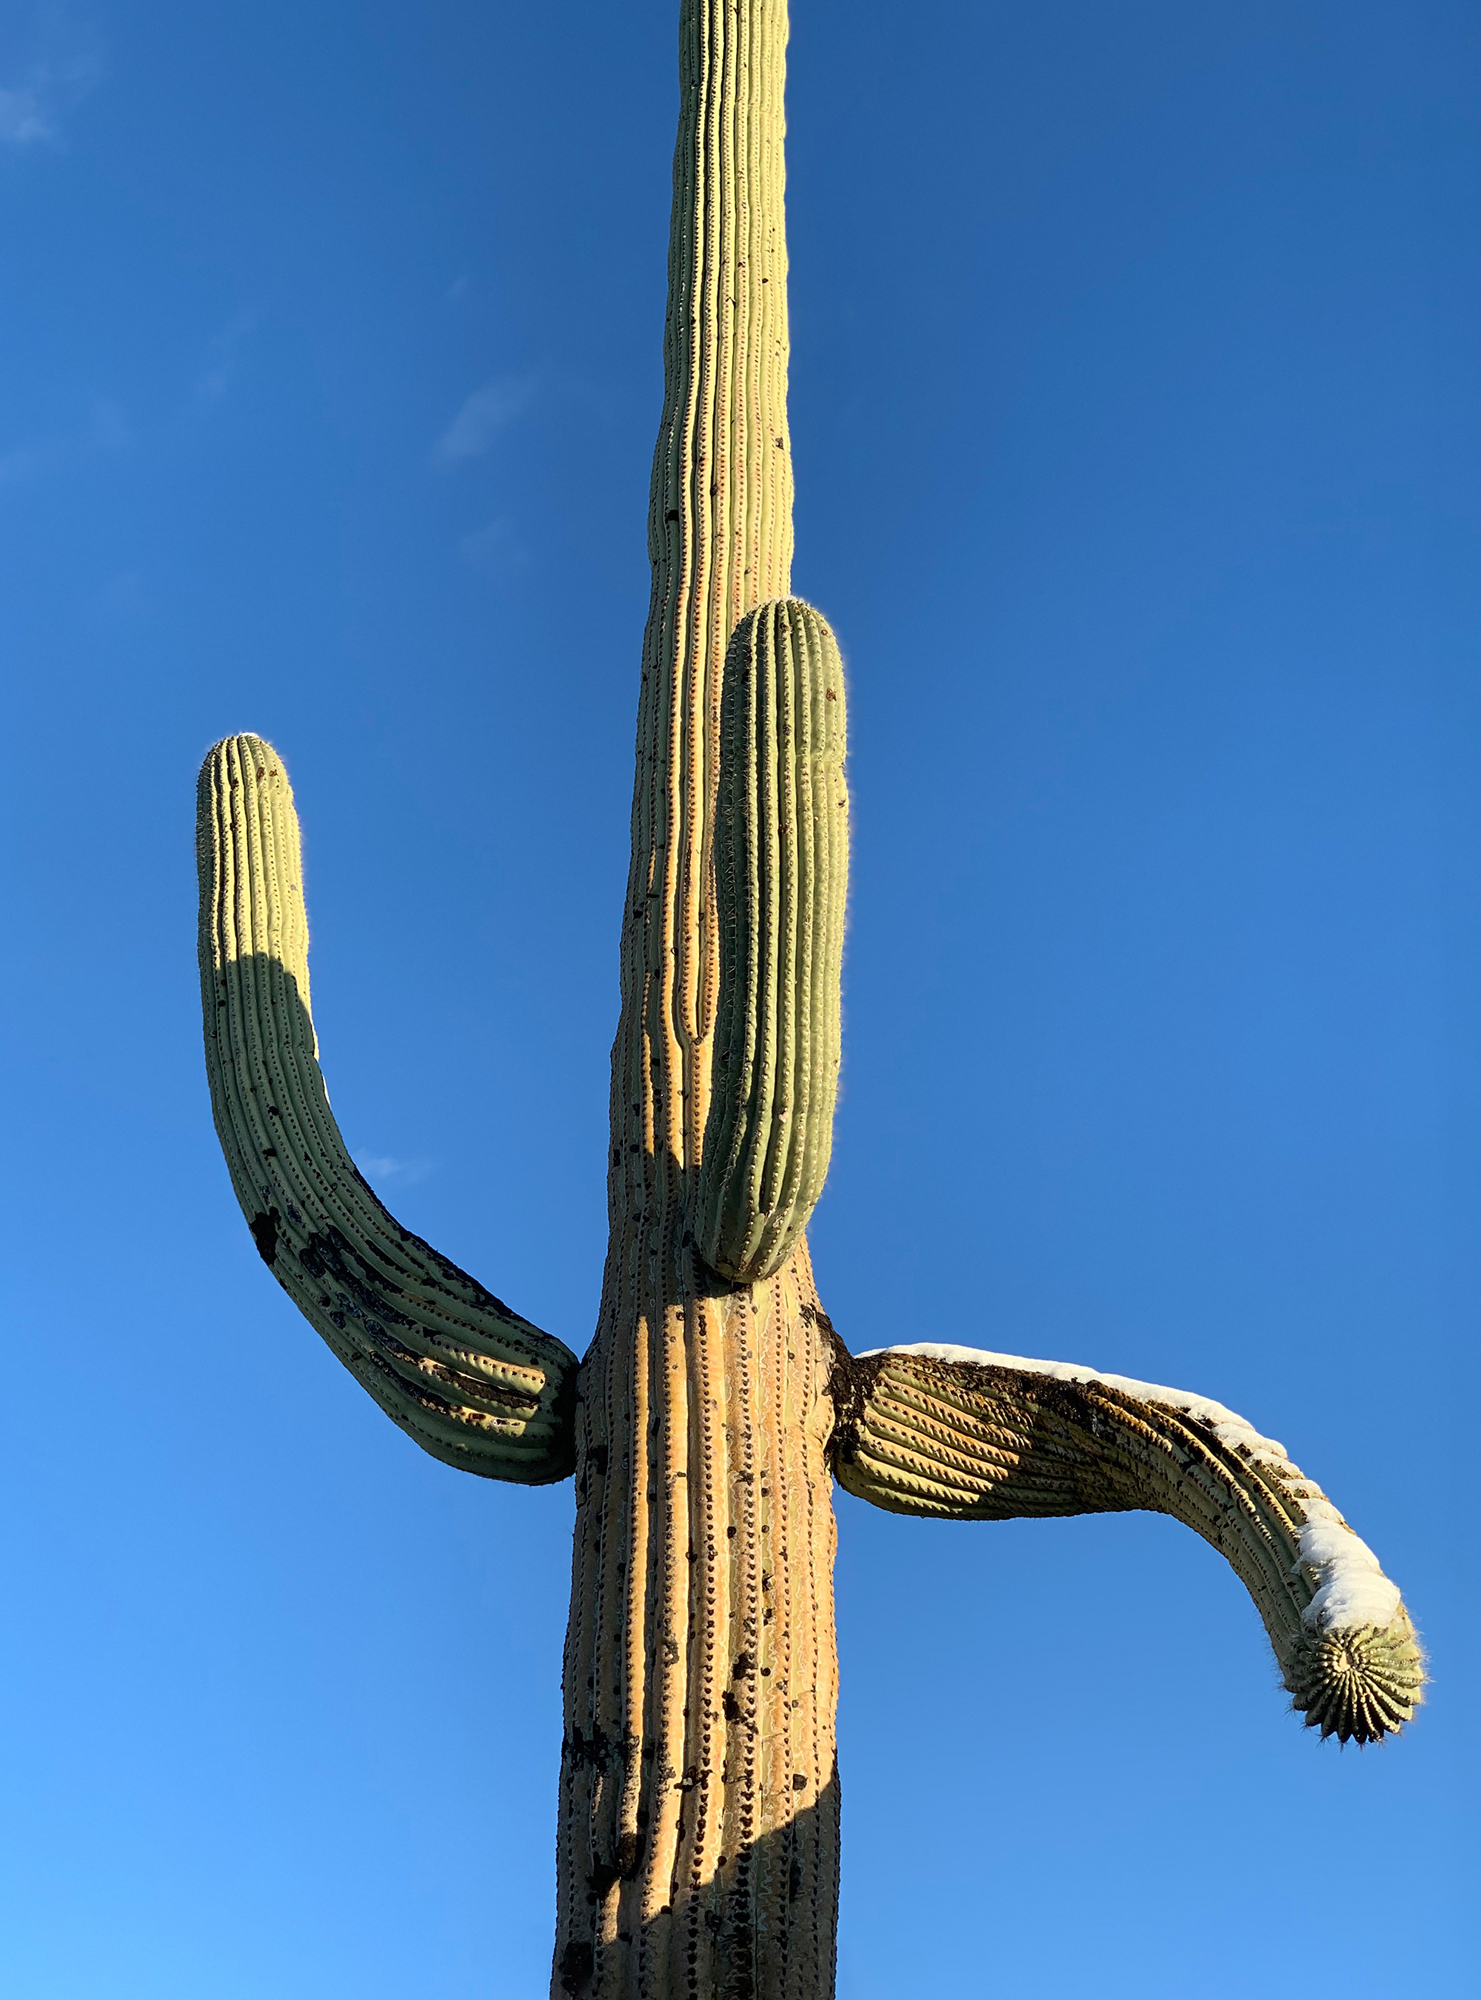 One of the many saguaro cactus shots captured on my iPhone. Notice the snow on the right arm? This was on the day after my birthday when the sun came out. Temps still in the 30’s though.